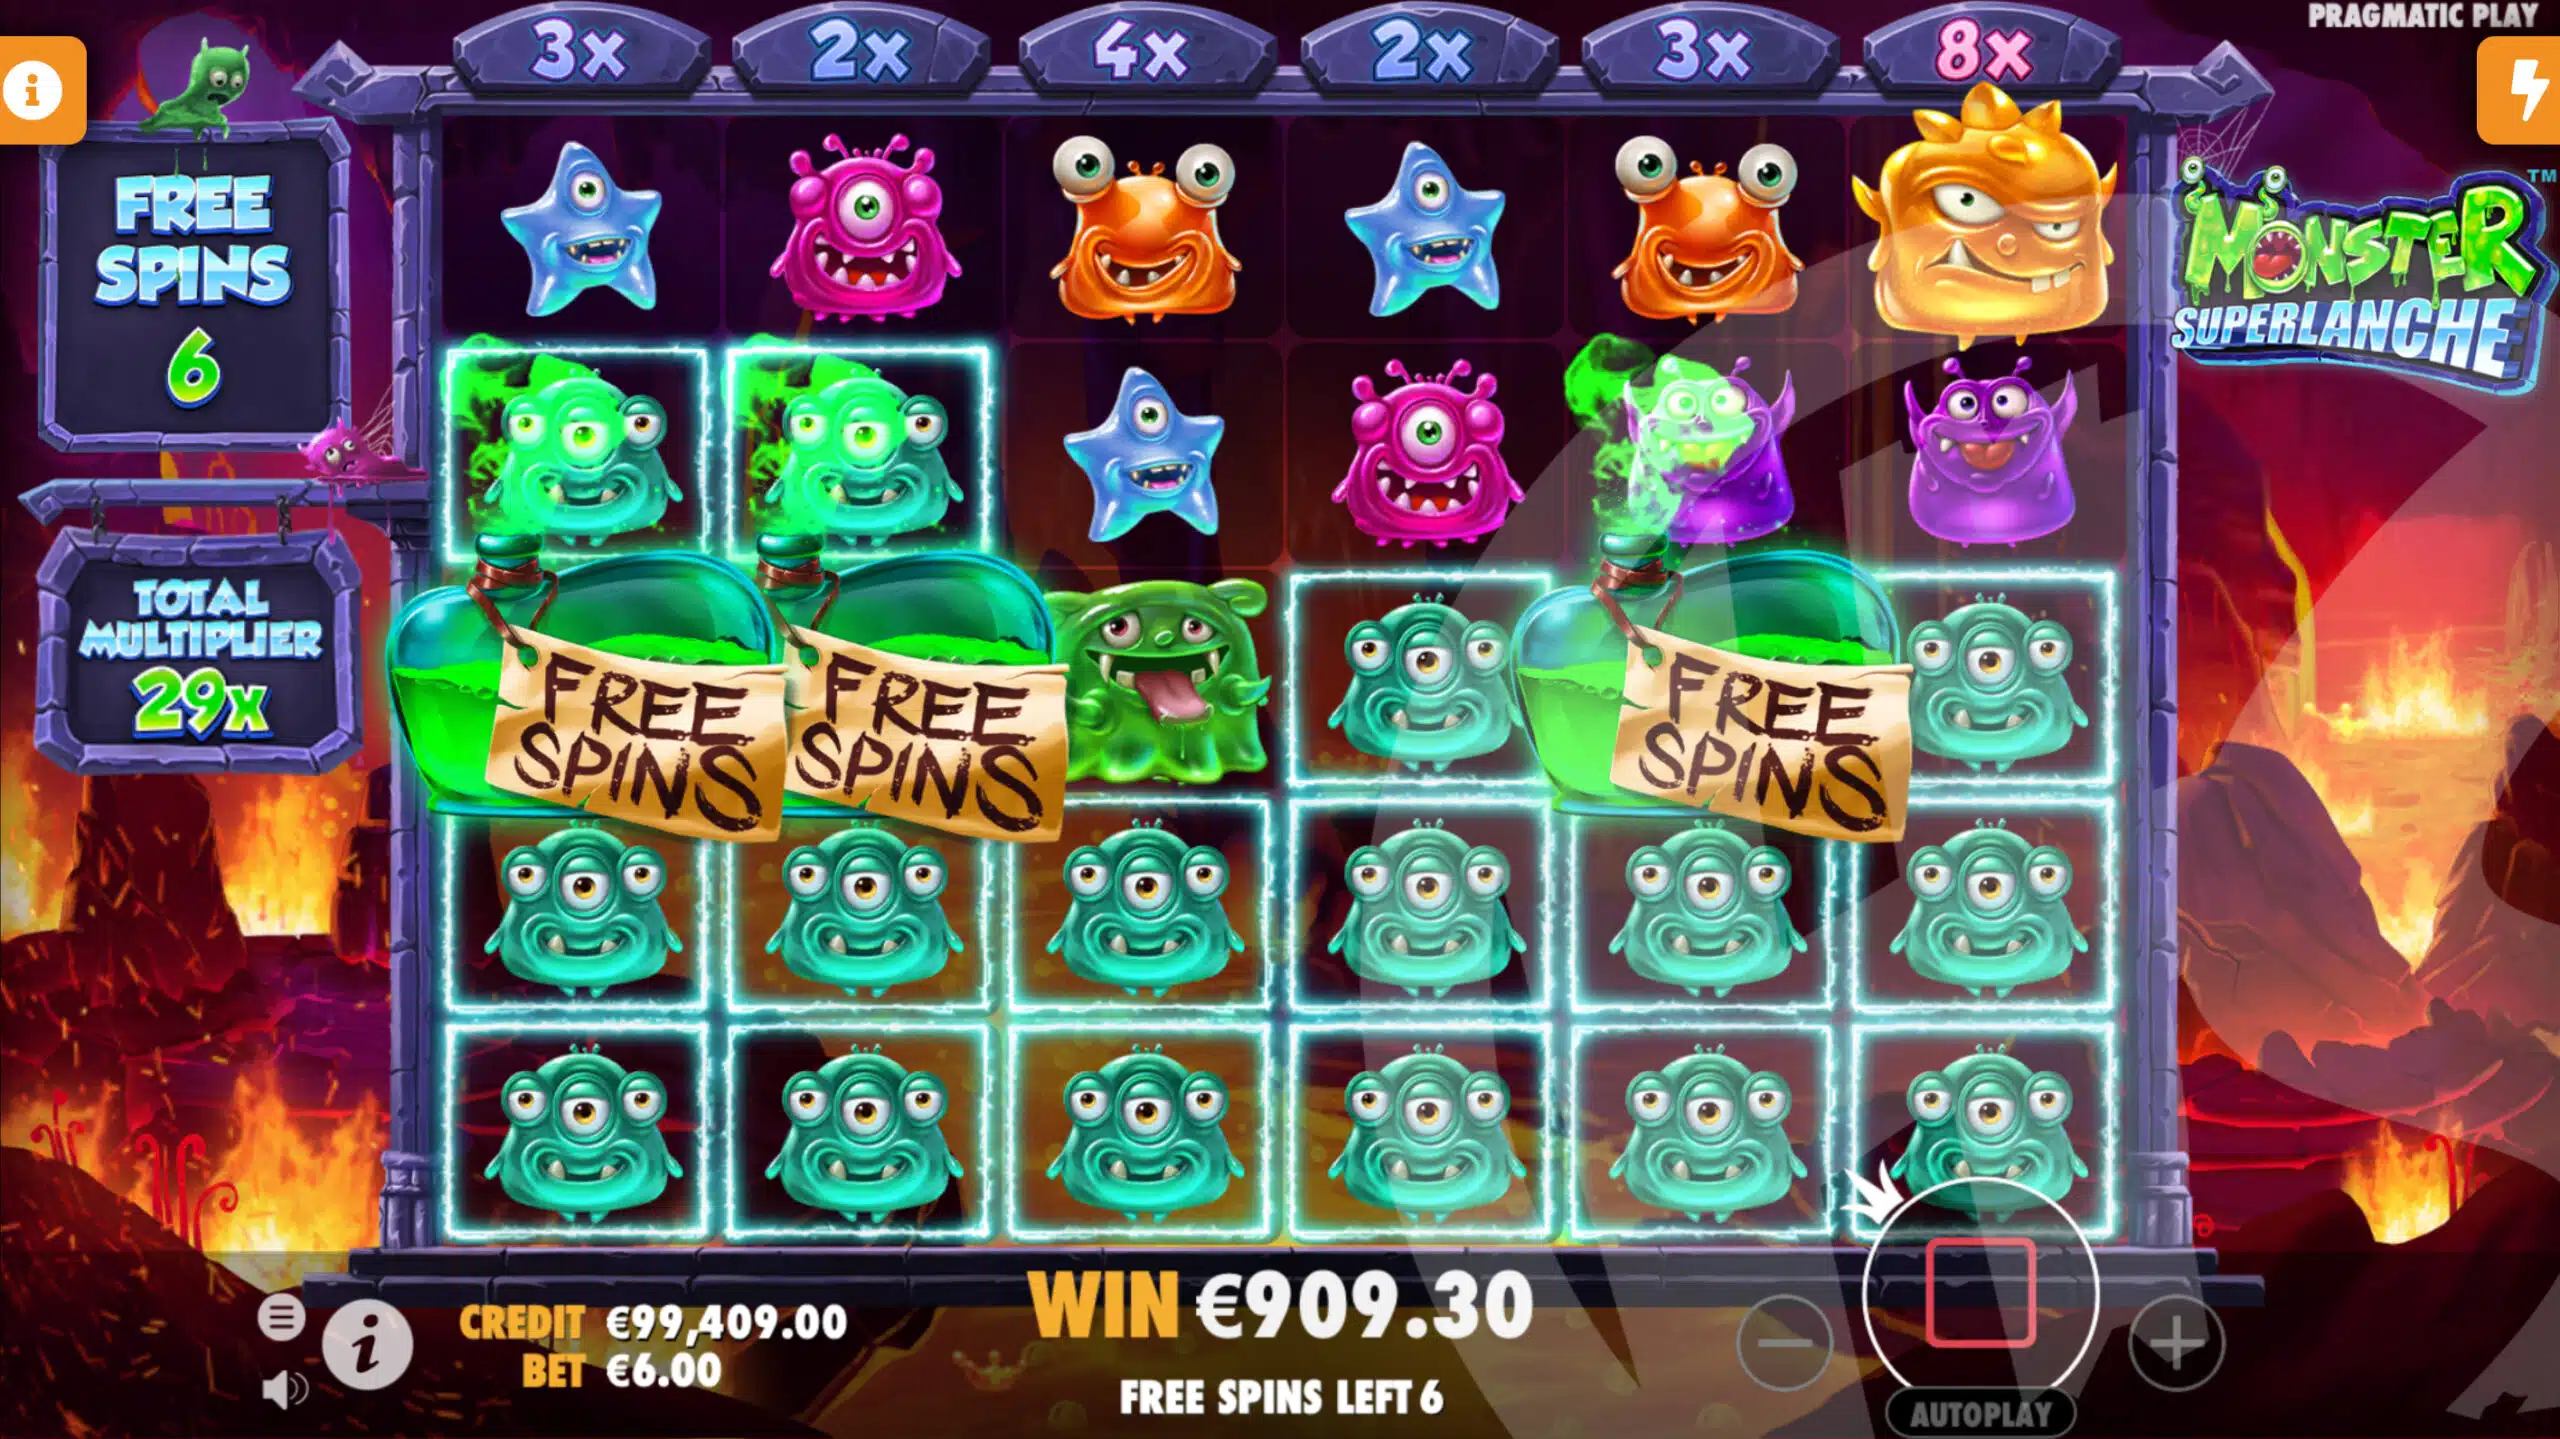 Land 3 or More Scatters During Free Spins to Be Awarded Additional Spins